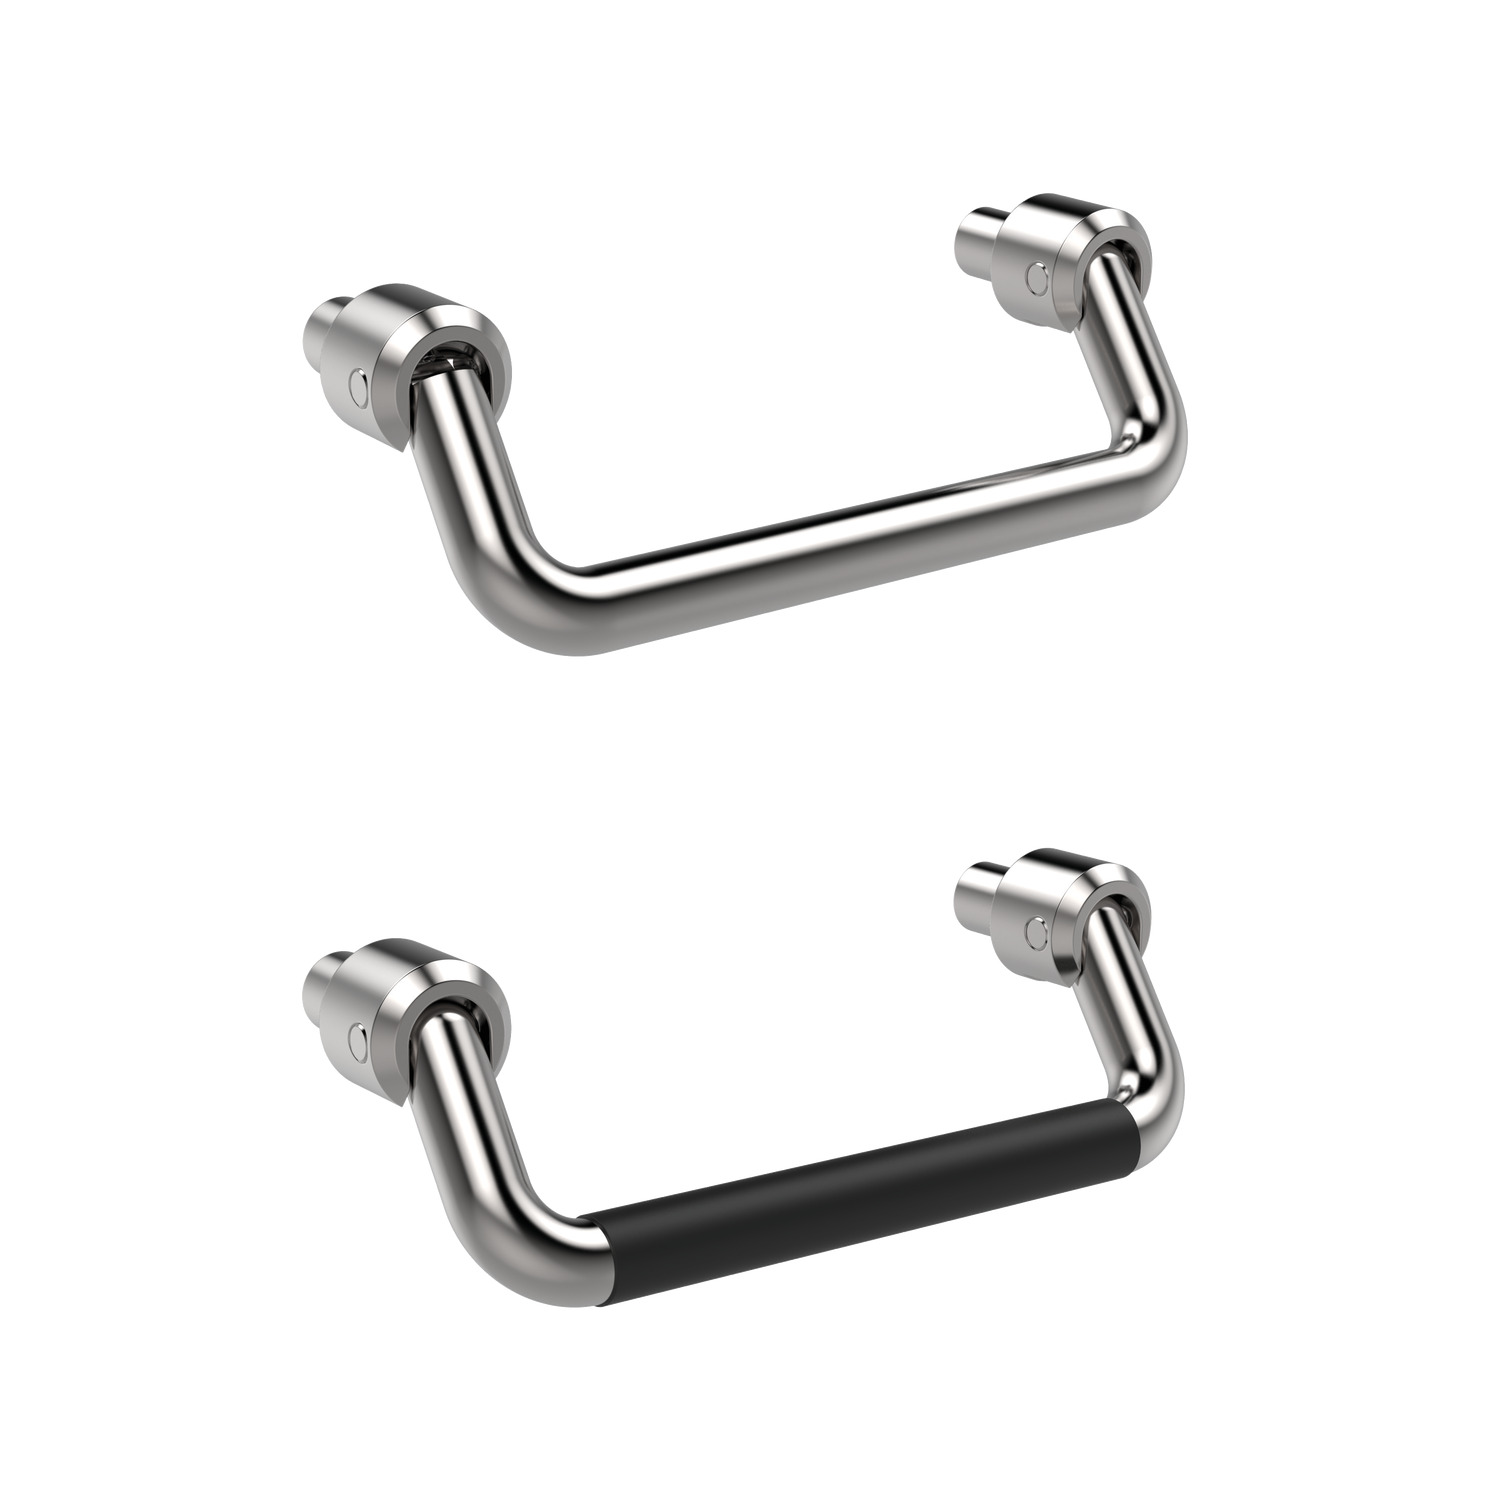 79570.W0680 Pull Handles, Collapsible - Steel With Plastic Grip - 180